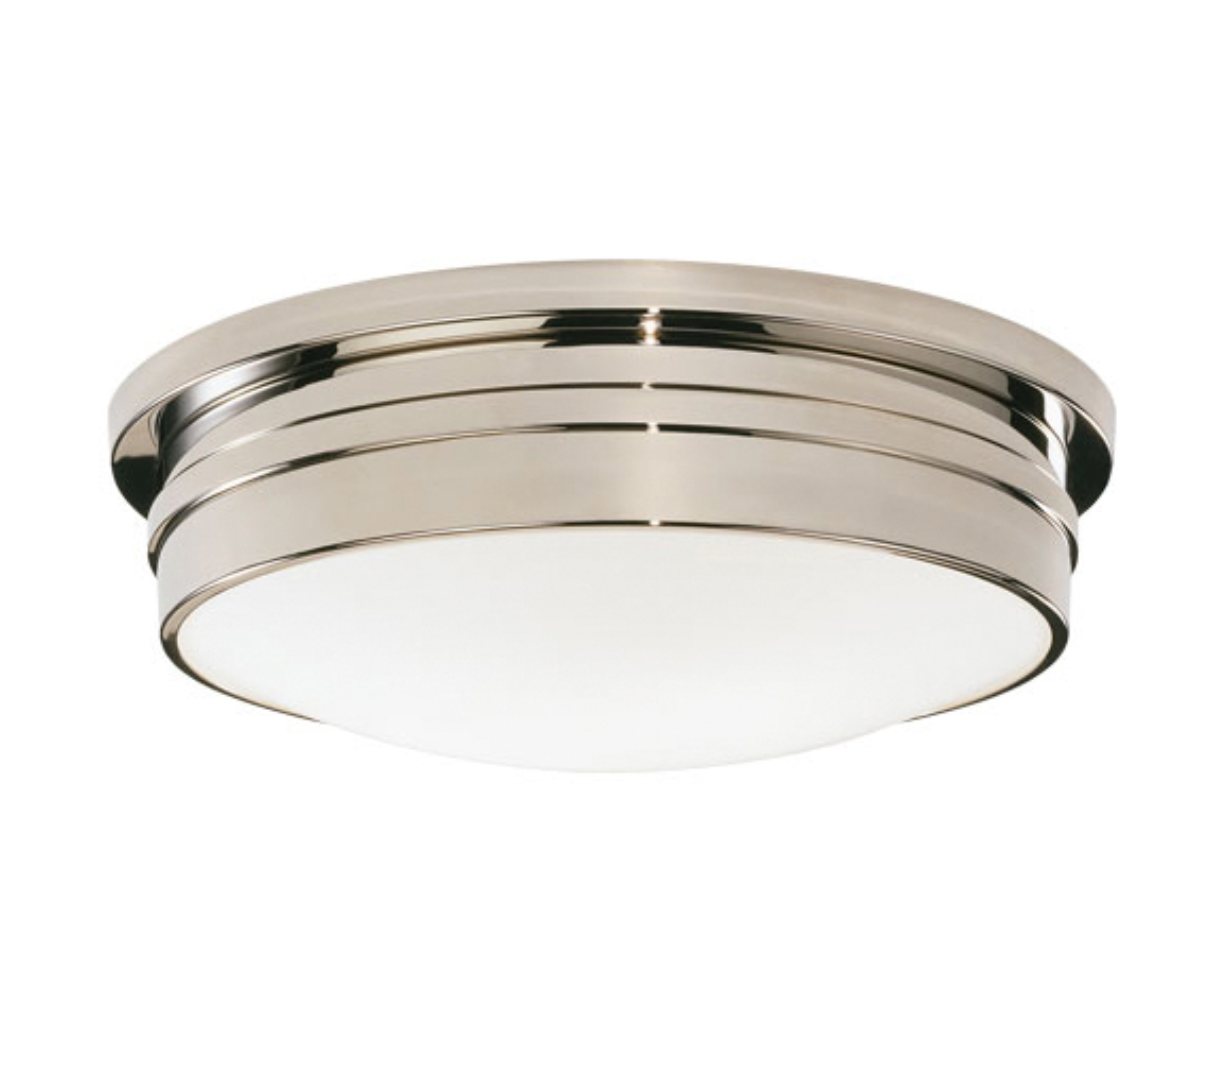 Classic Round Flushmount in Polished Nickel Finish | Newport Lamp And Shade | Located in Newport, RI